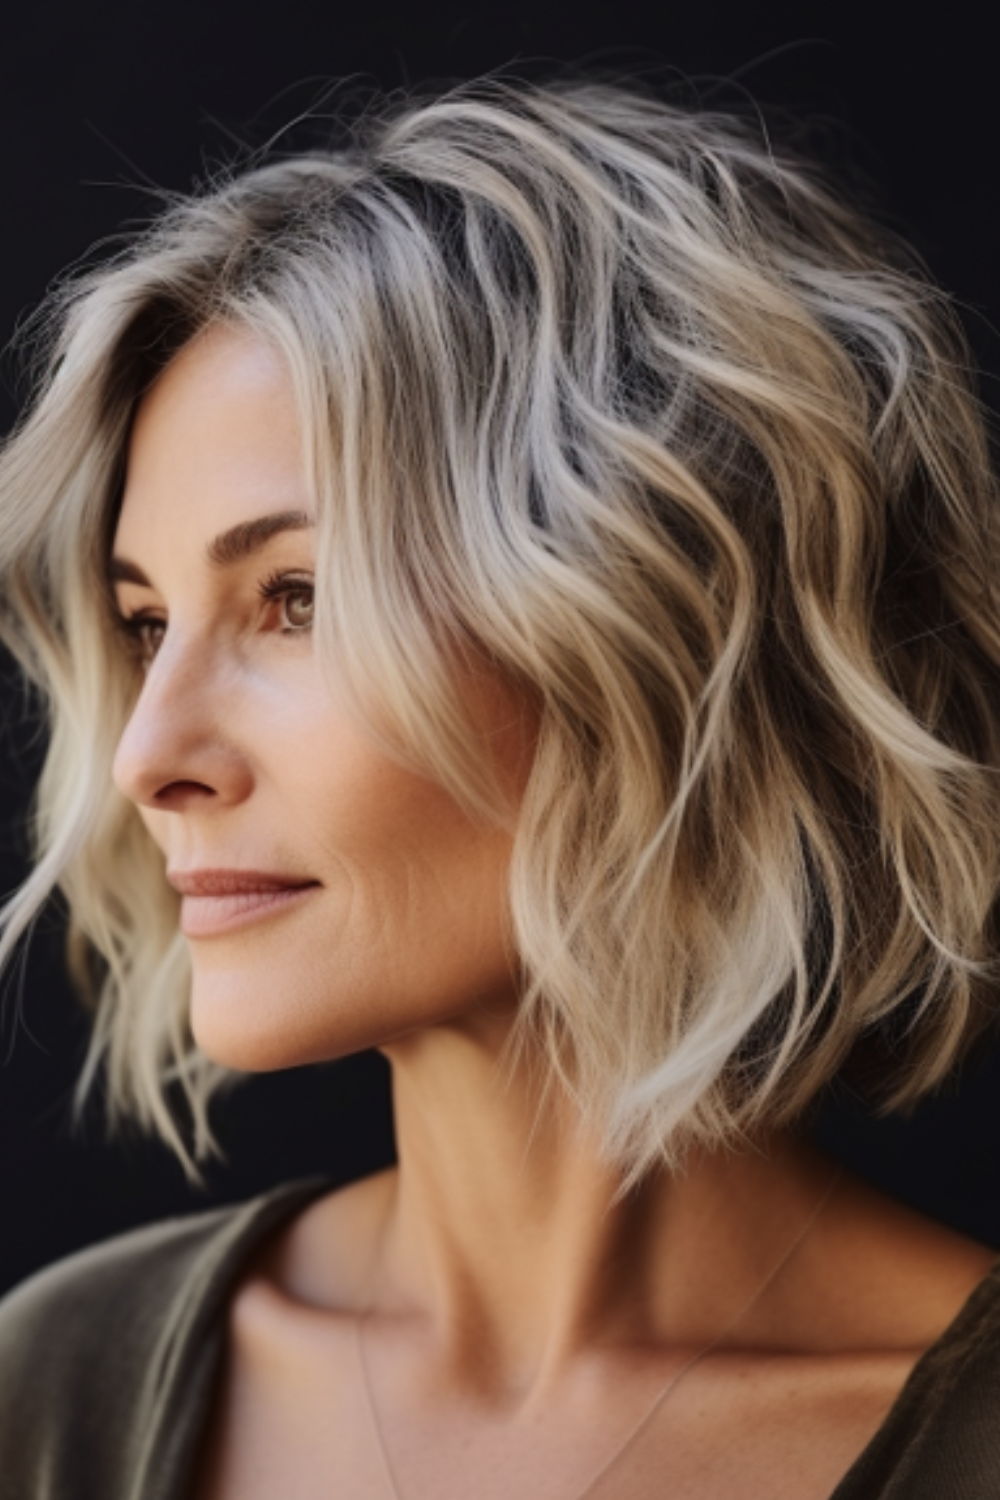 Stylish and Chic: Short Haircuts for Older Women That Will Make You Look Youthful